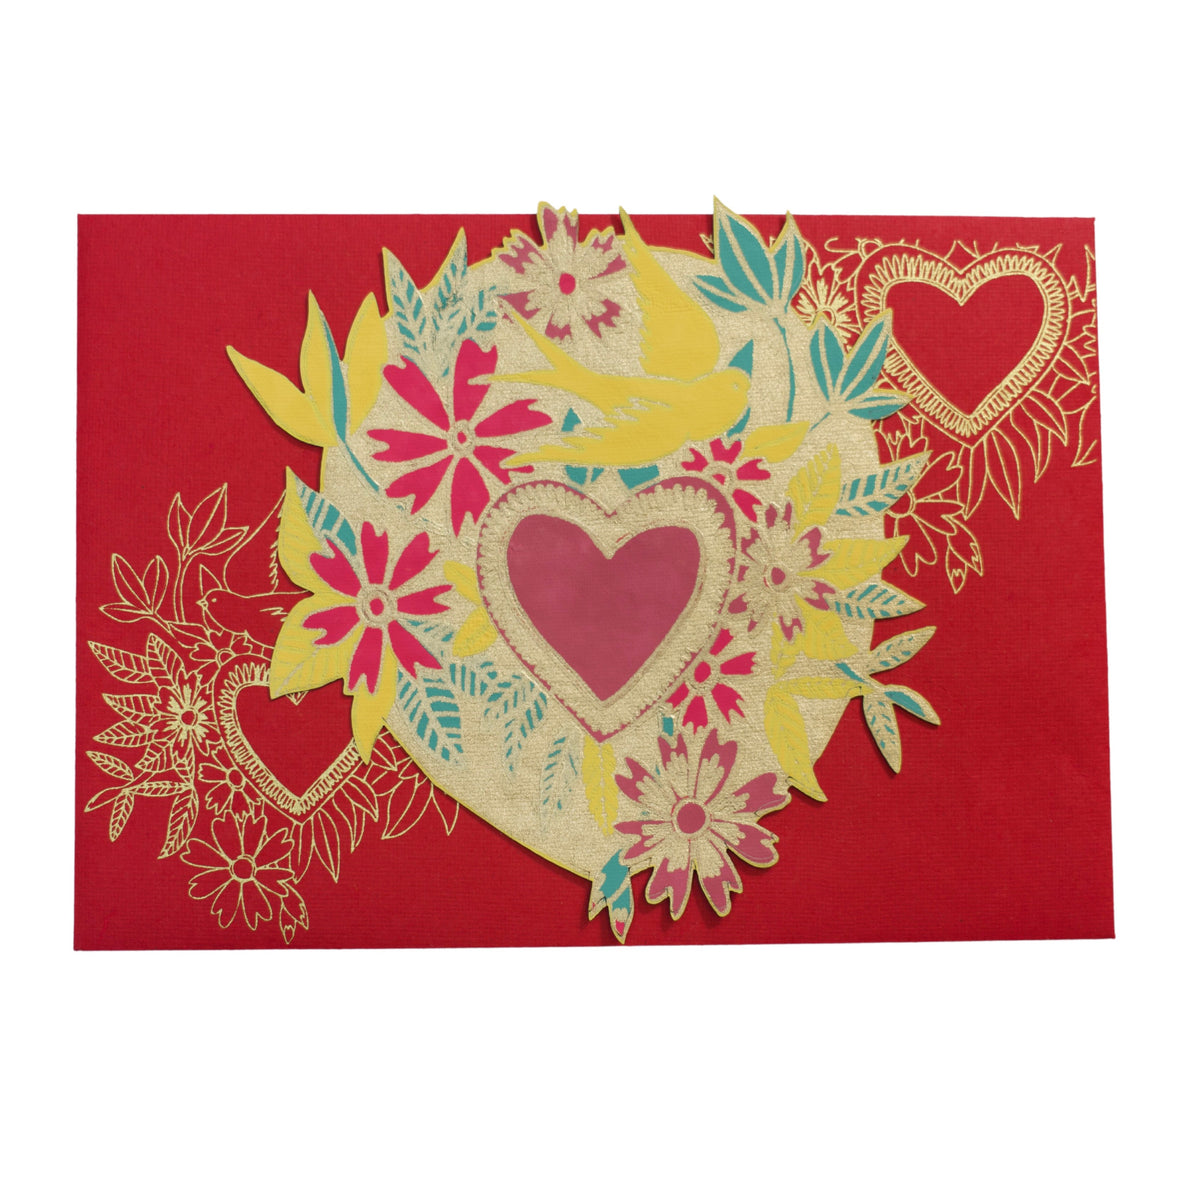 East End Press Floral Heart Greeting Card